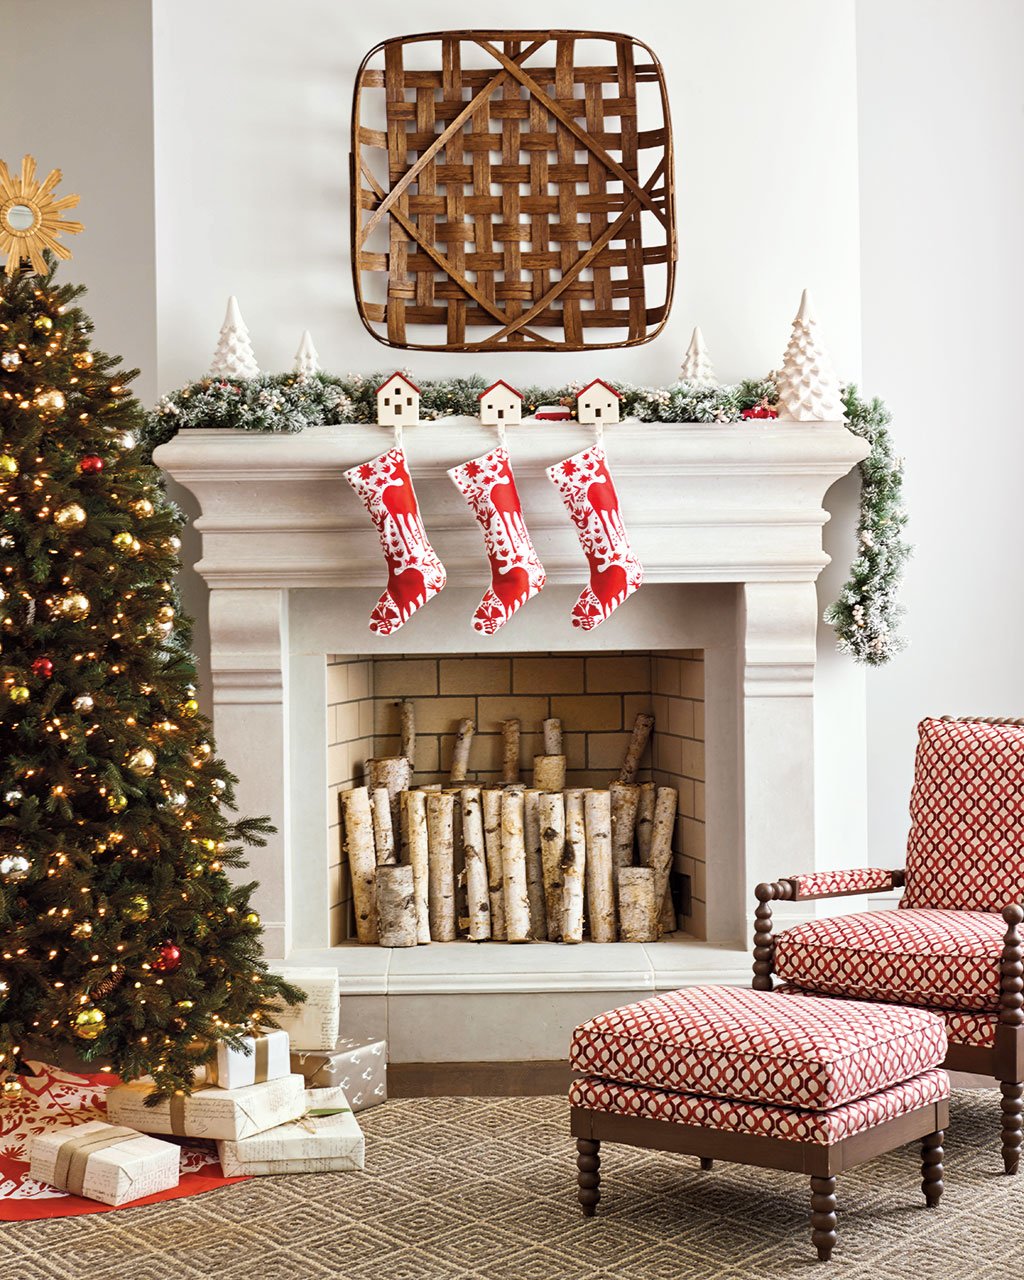 3 Festive Mantels to Inspire Your Holiday Home - How to Decorate